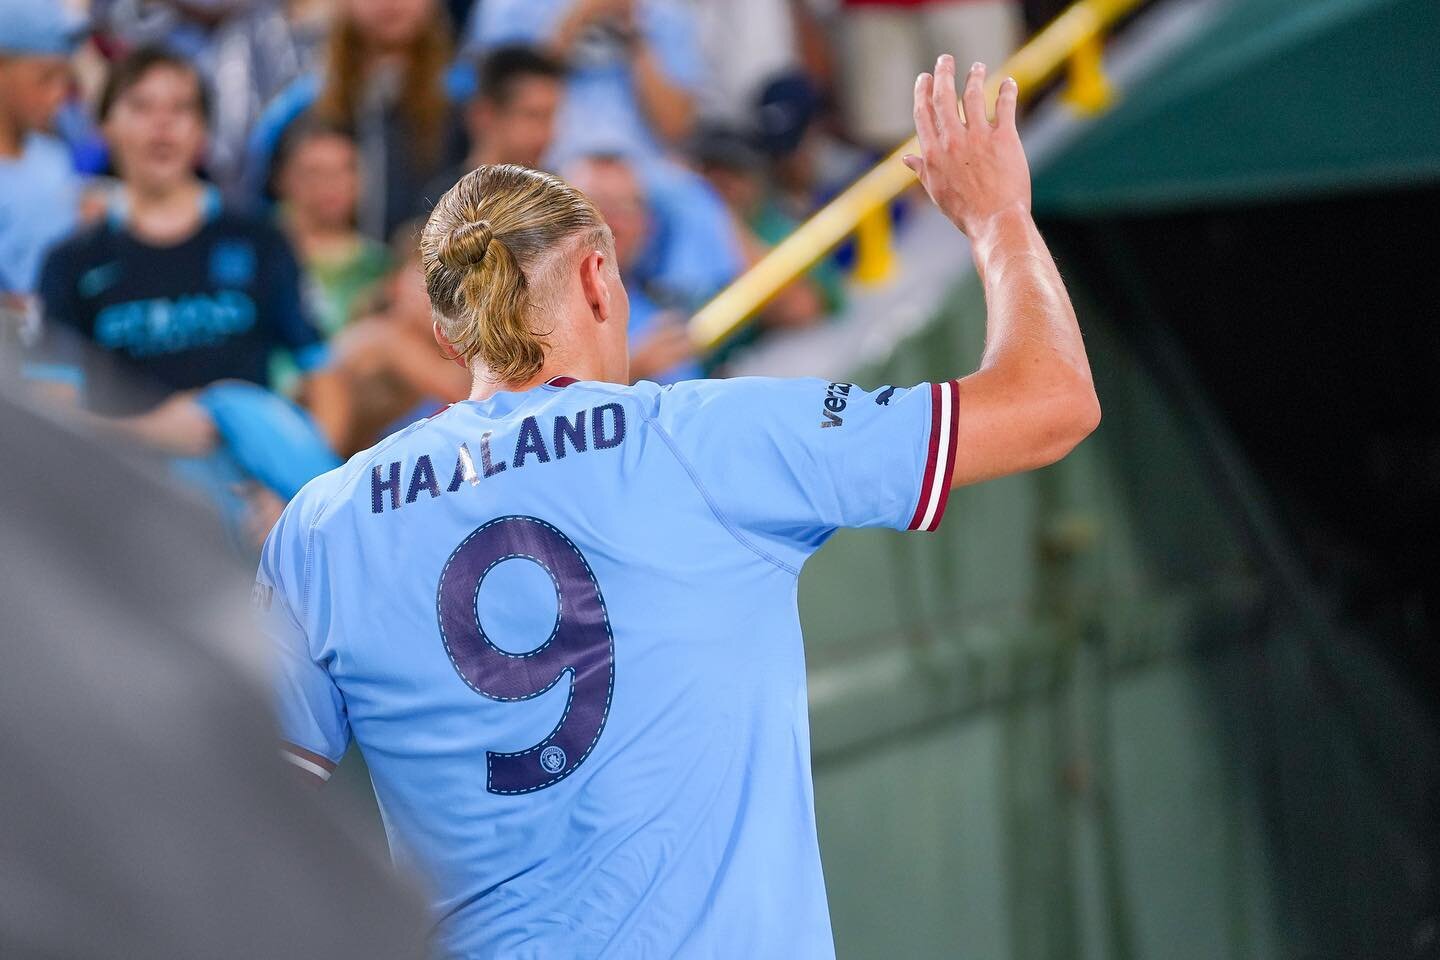 It only took @erling.haaland 12 minutes to score his first goal for @mancity 🌟
-
📸 : Sony A7R4 | Sony 200-600 f/5.6-6.3 
#sony